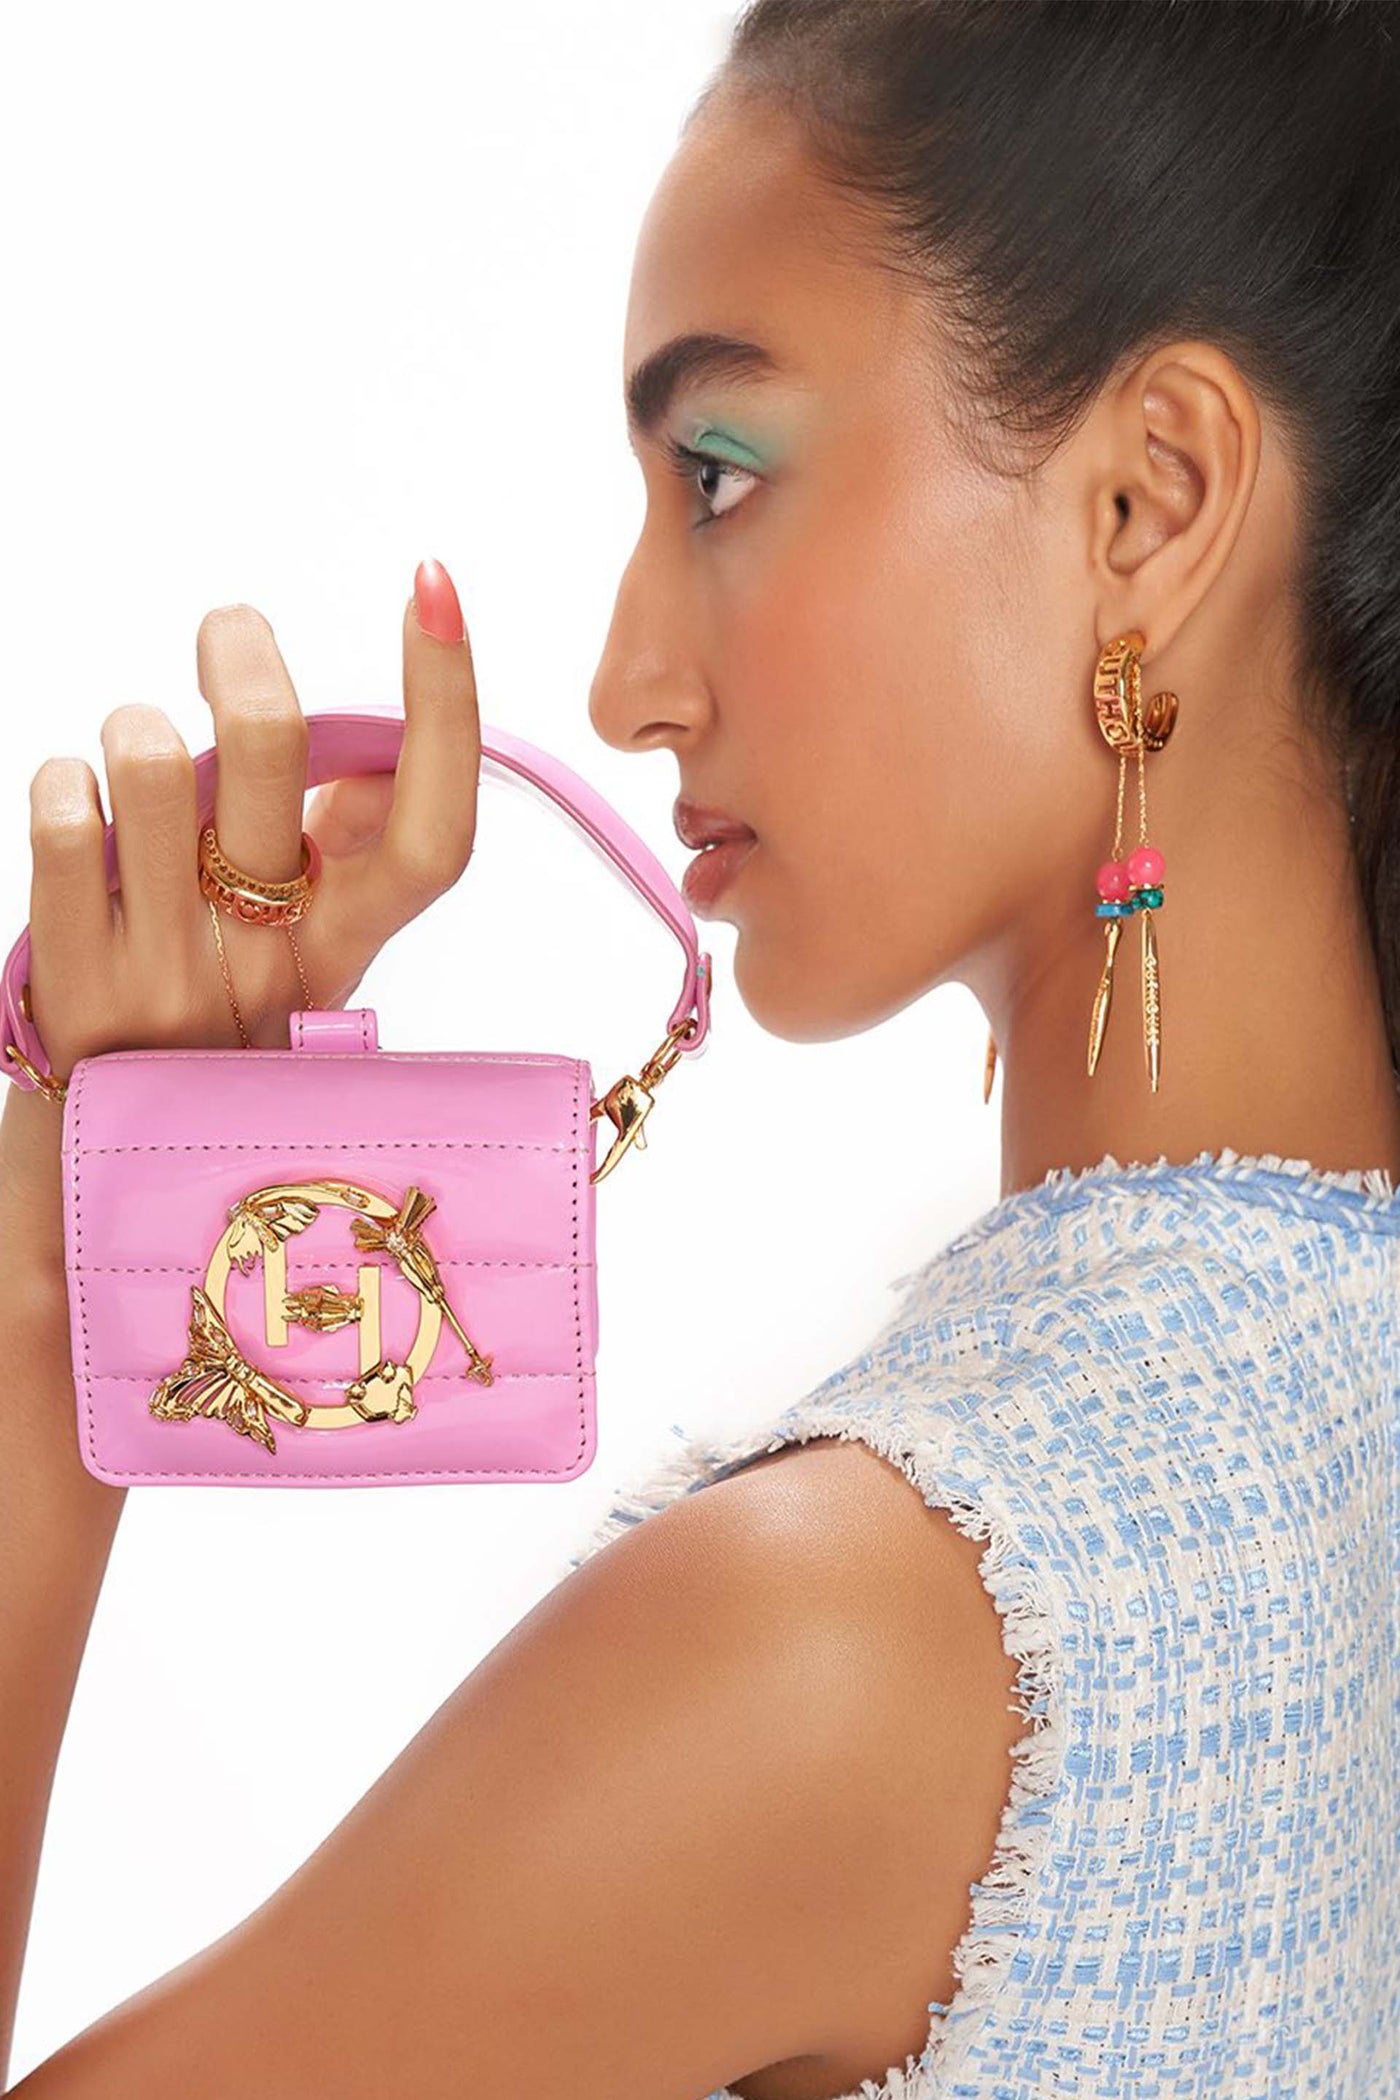 Outhouse Oh V Furbie In Taffy Pink accessories online shopping melange singapore indian designer wear